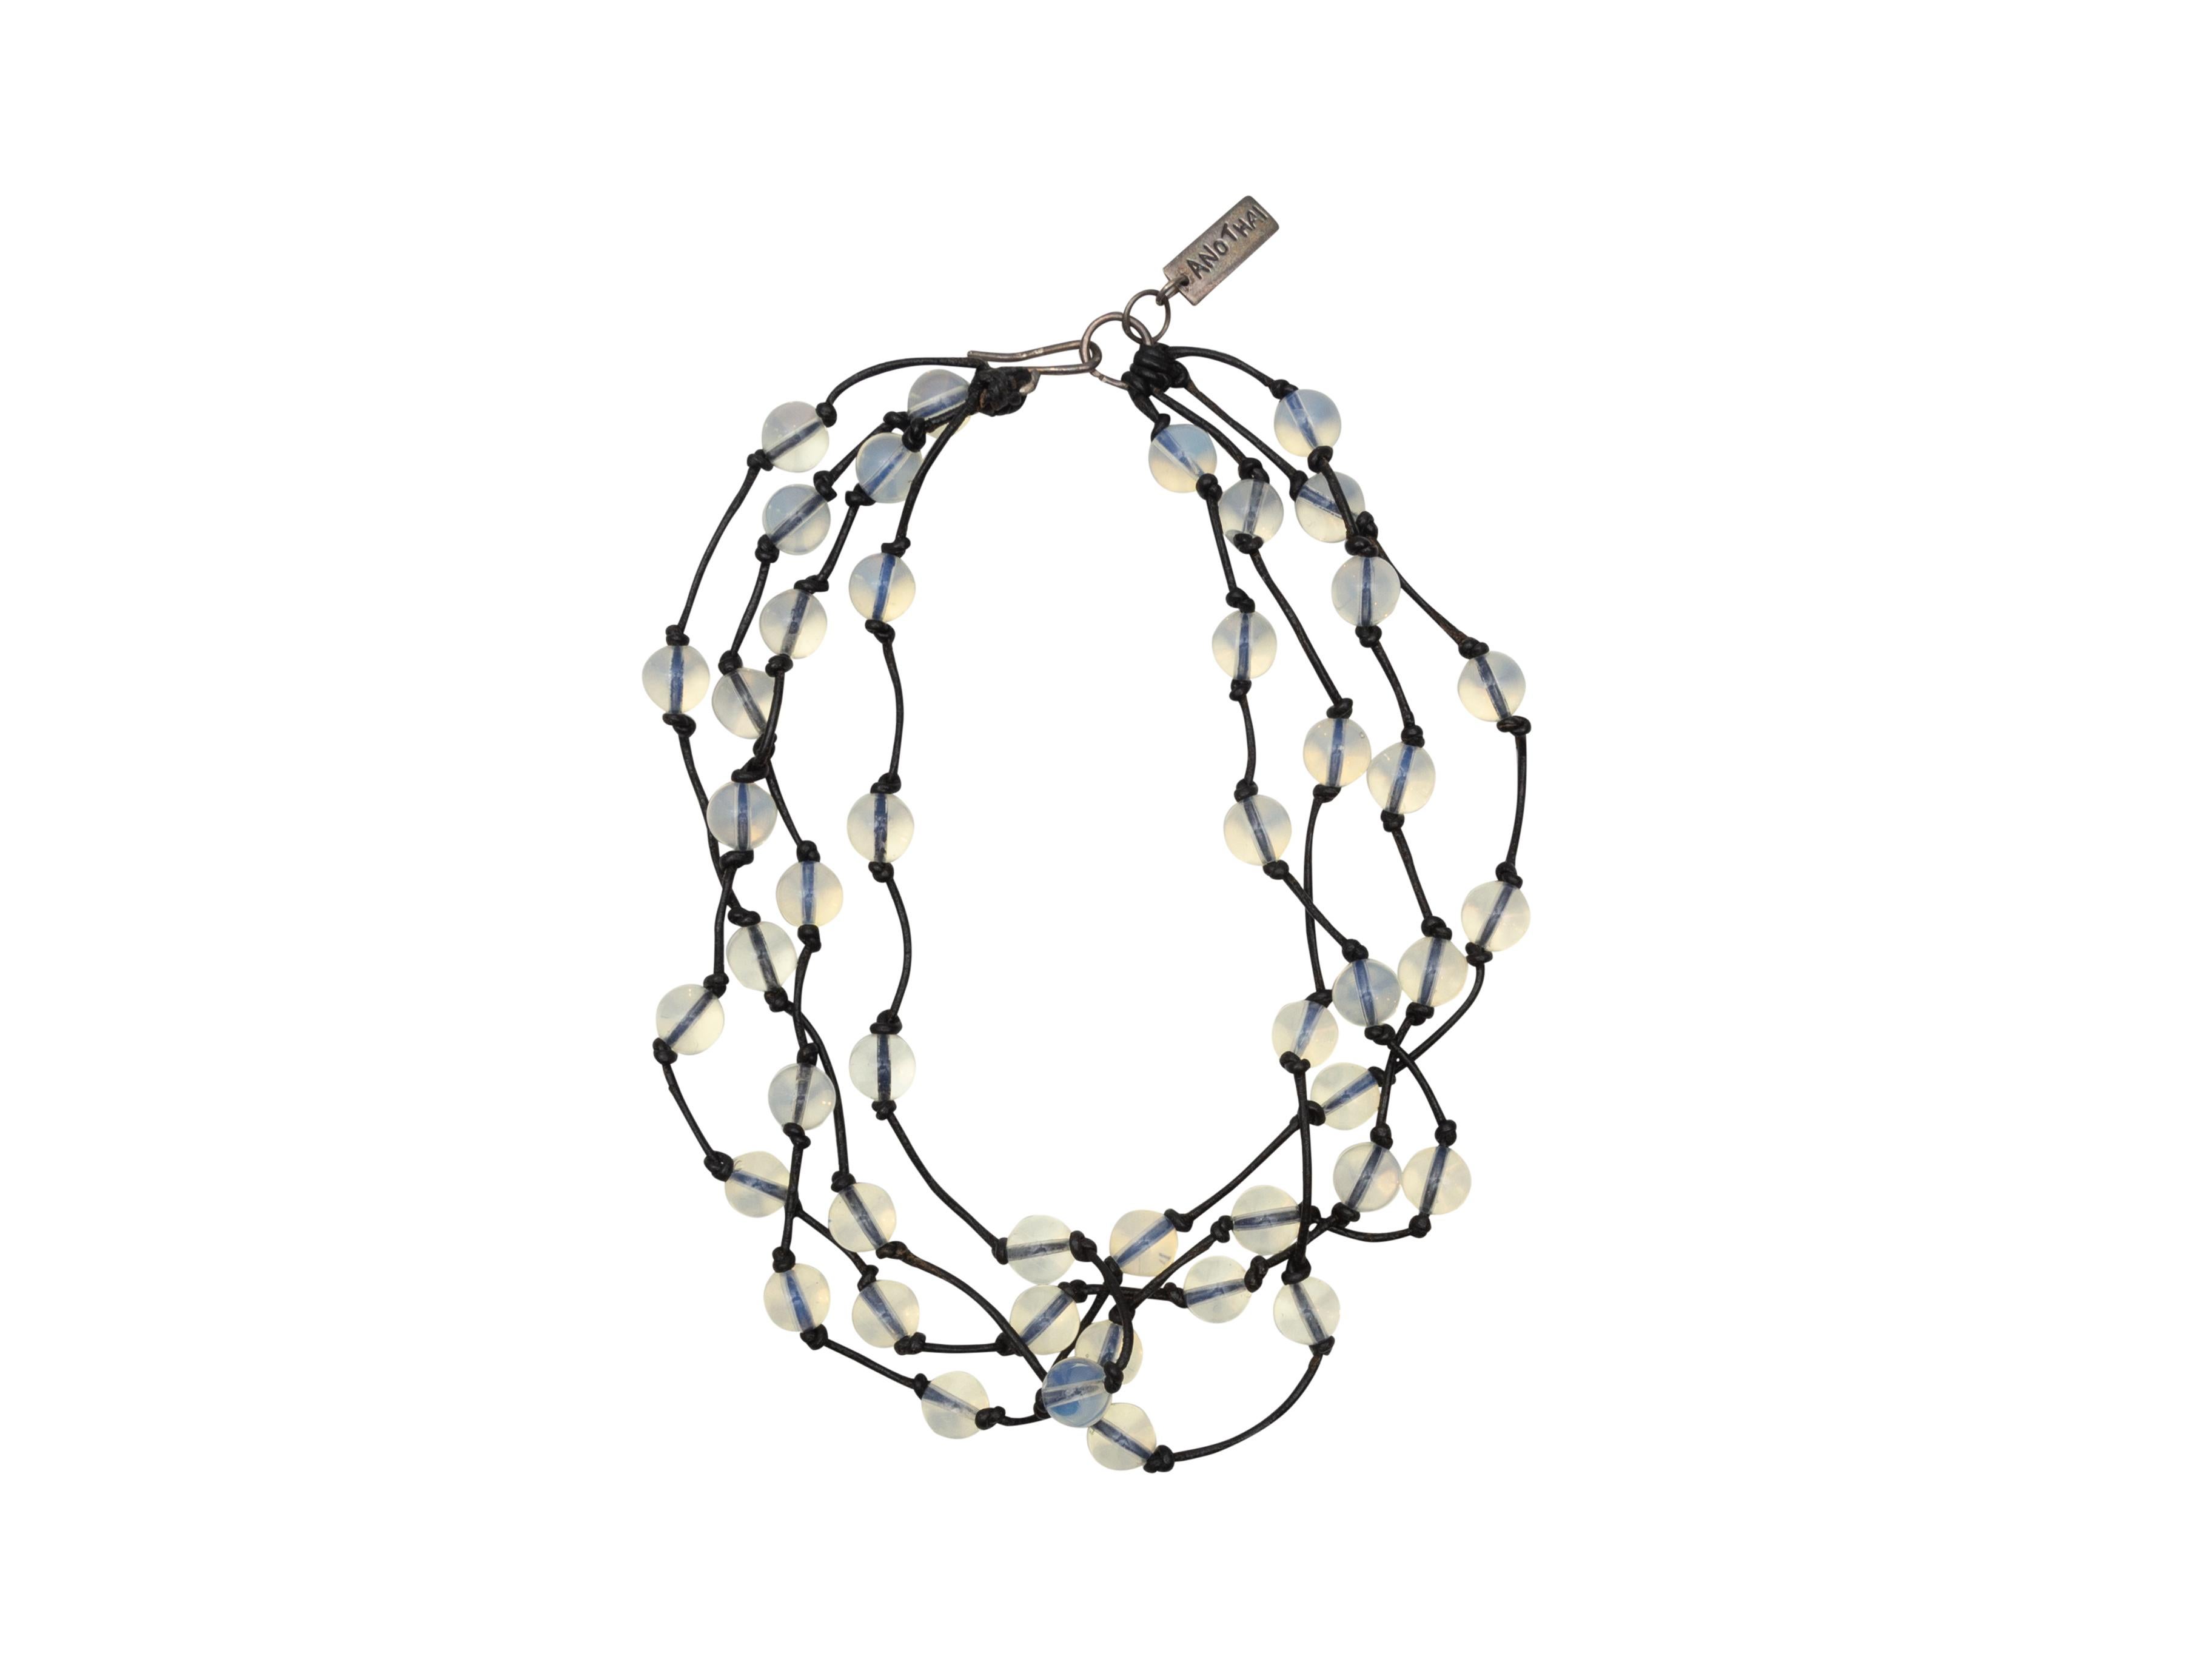 Product details: Light blue quartz and black knotted cord multistrand necklace by Anothai Hansen. Hook closure. 15